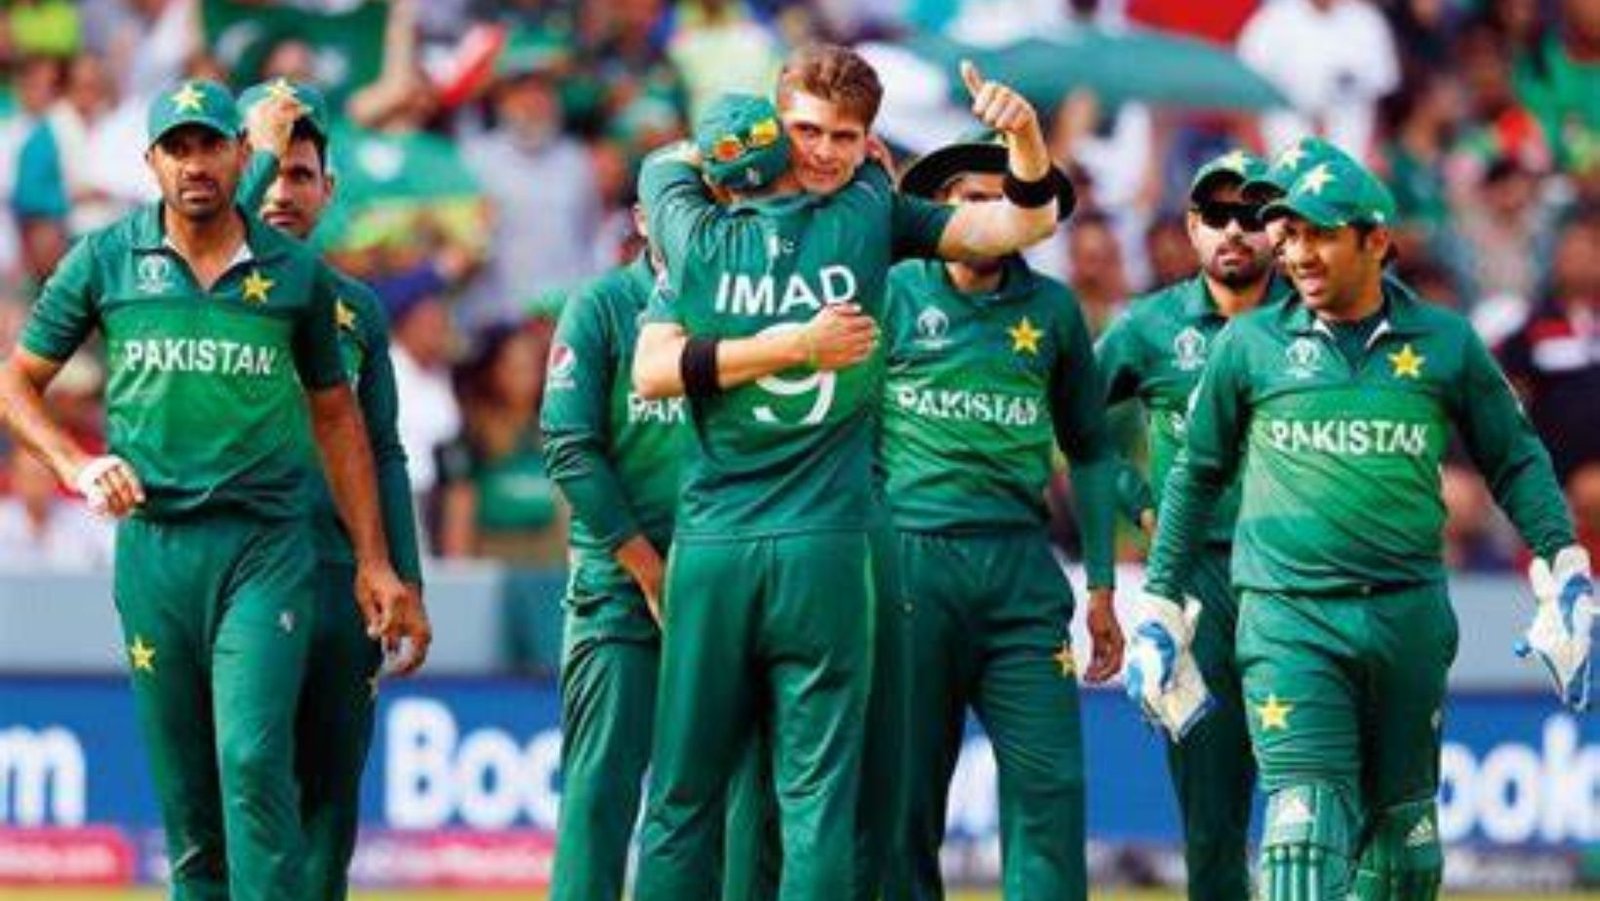 PCB will not compensate Pakistani players for missing the ILT20 tournament in the UAE